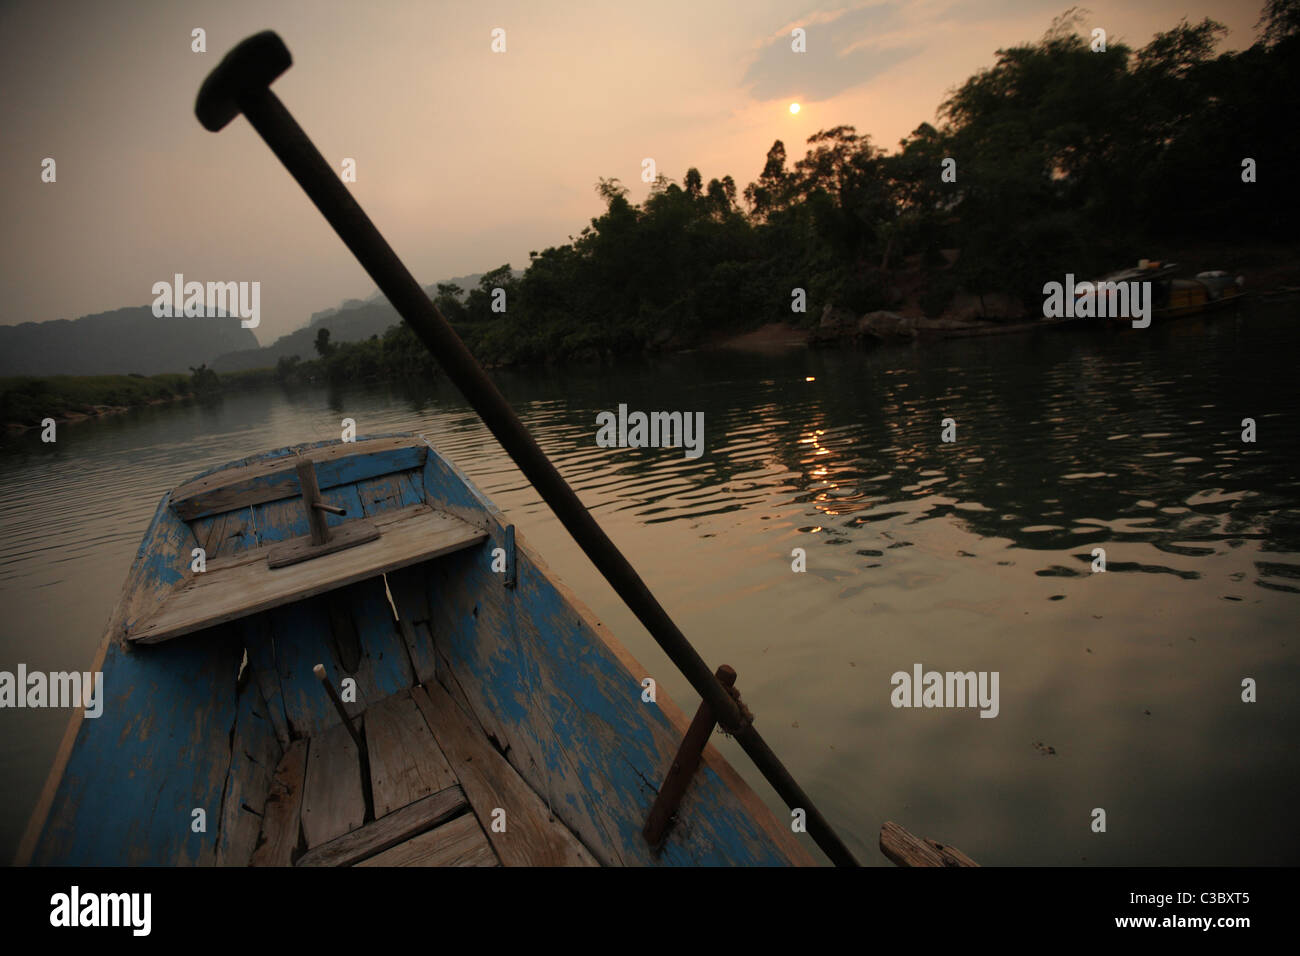 On board a small wooden boat on the River Son, at Son Trach, Phong Nha Ke Bang National Park, in Vietnam late one afternoon Stock Photo